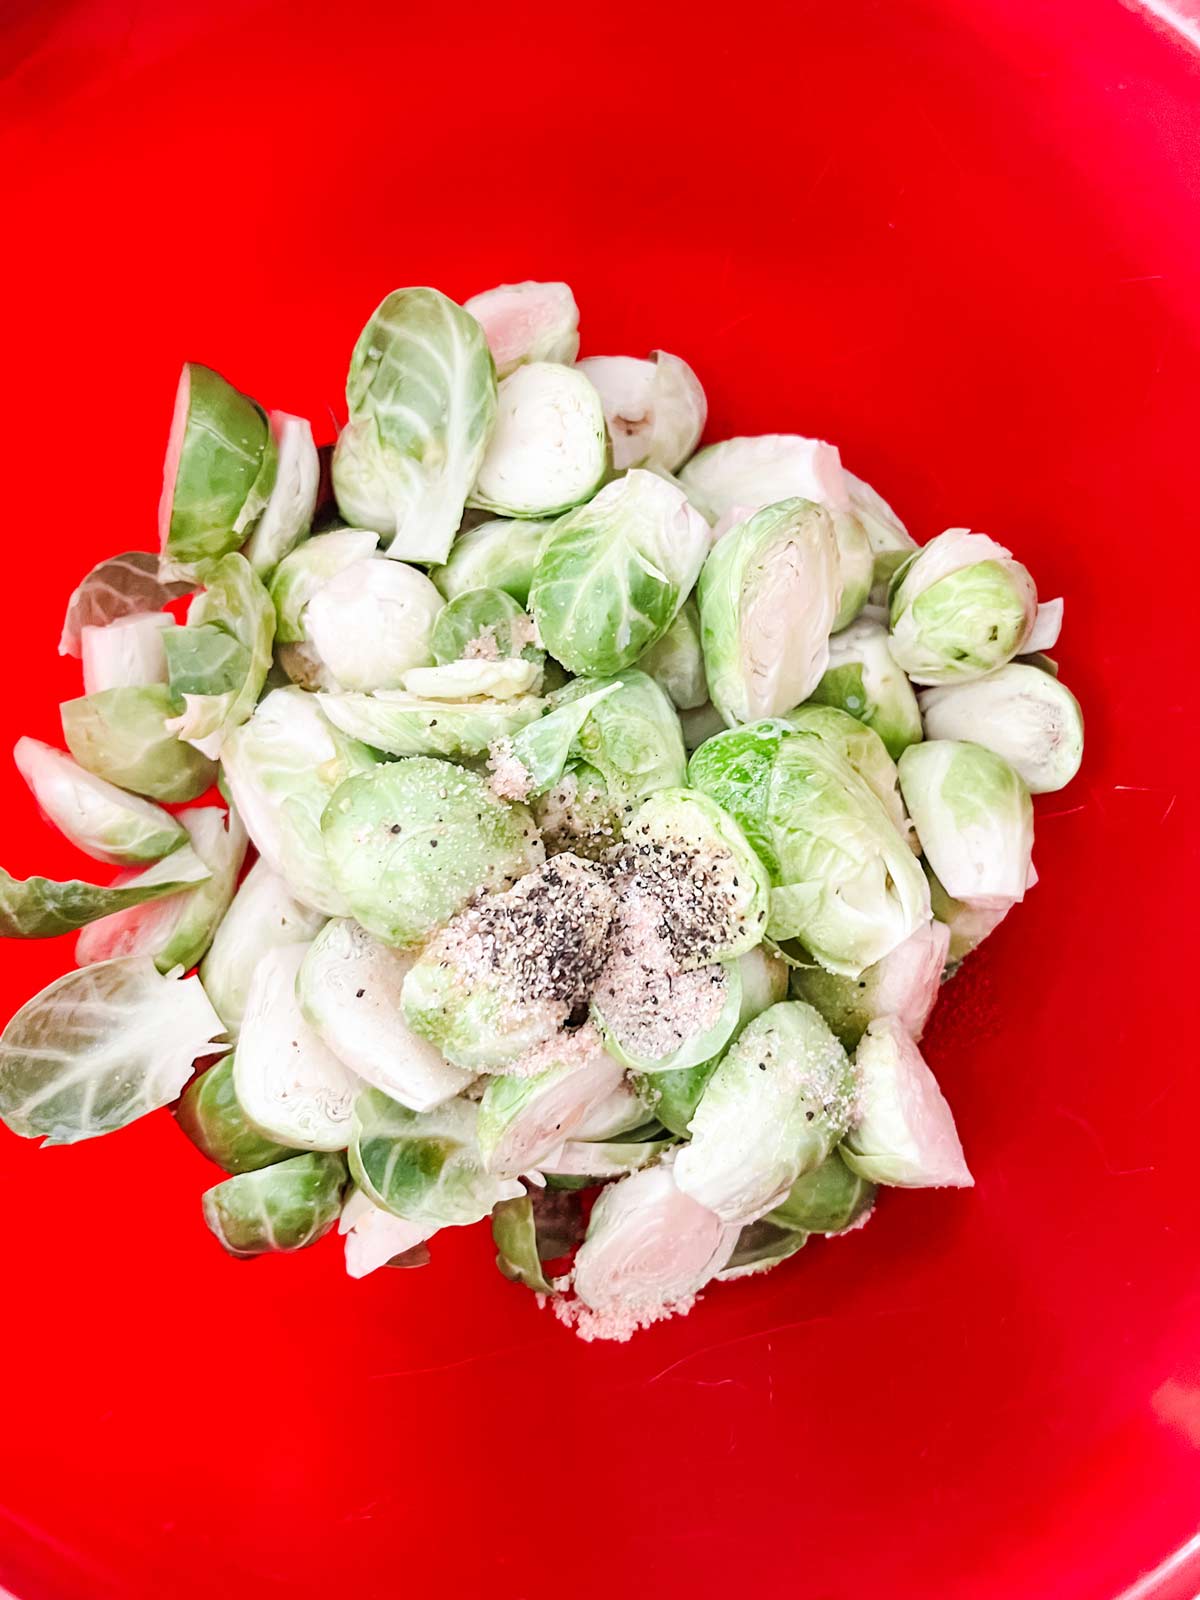 Brussels sprouts and seasonings in a red bowl.